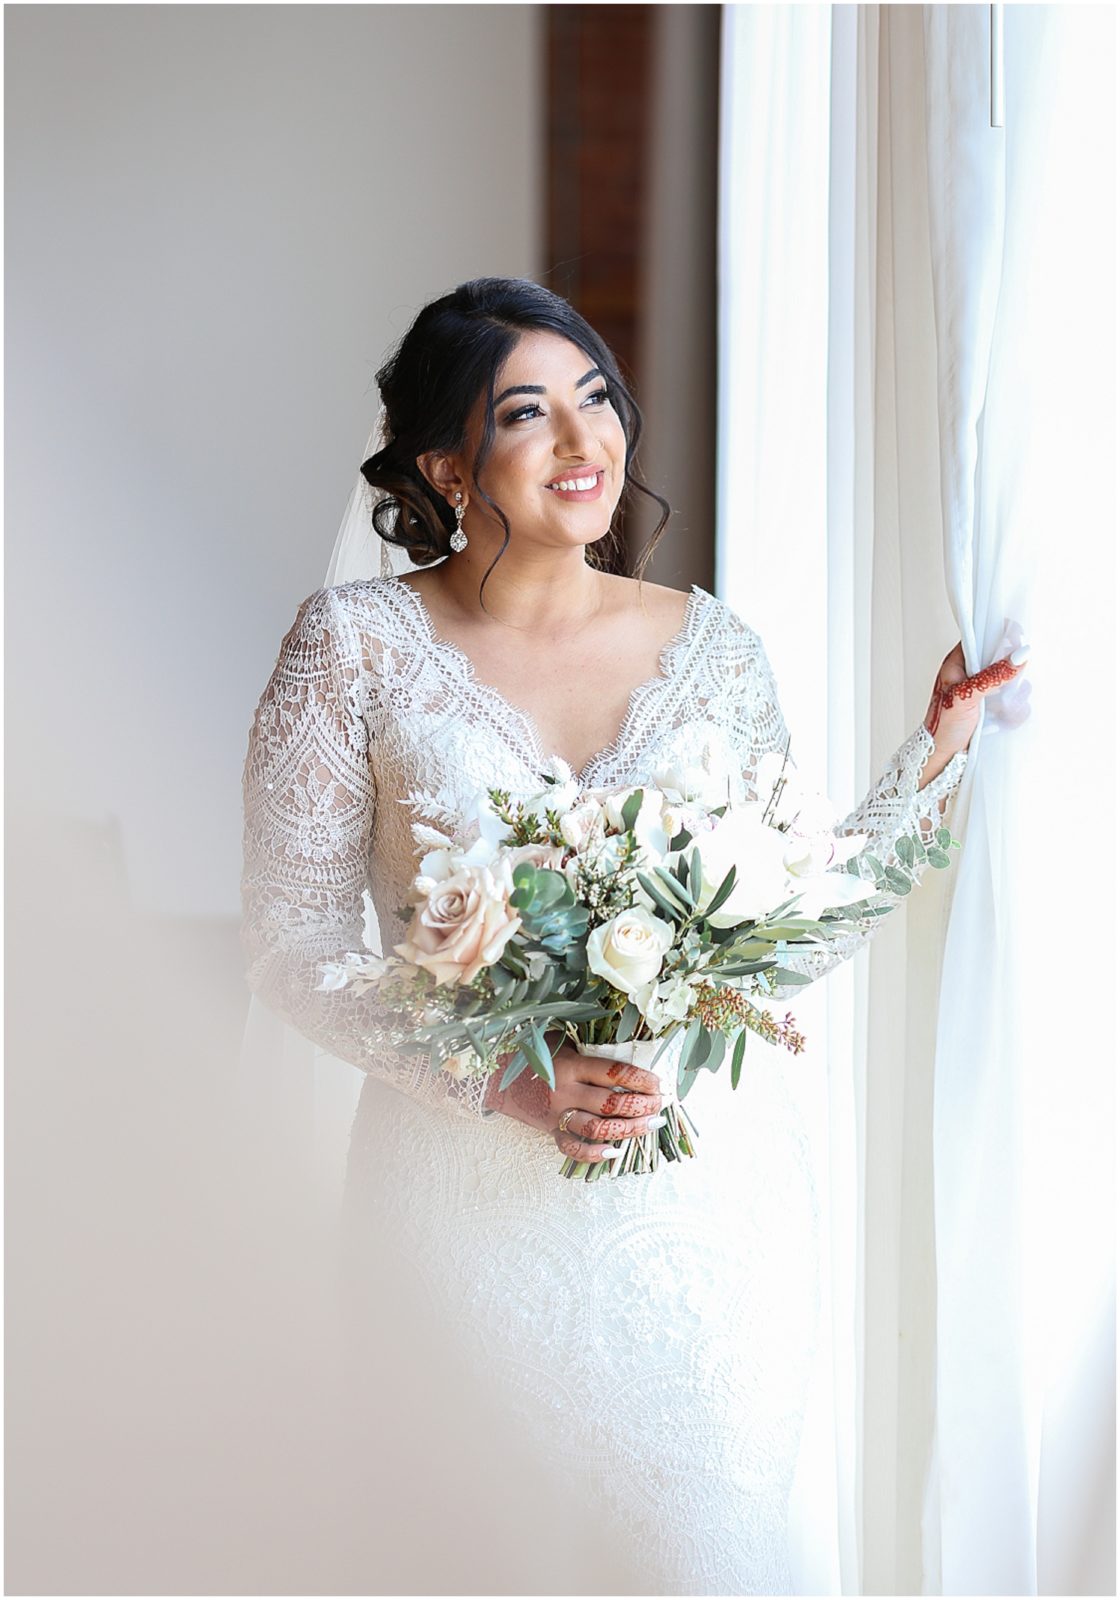 D AND R FLORAL - KANSAS CITY  - THE BERG EVENT SPACE IN KC - PHOTOS BY MARIAM SAIFAN PHOTOGRAPHY - BEST WEDDING PHOTOGRAPHER IN KANSAS CITY AND DESTINATION WEDDINGS - MUSLIM INDIAN SOUTH ASIAN WEDDING - LONG LACE WEDDING DRESS - LONG SLEEVE LACE WEDDING DRESS - WEDDING FLOWERS - INSPIRATIONAL 